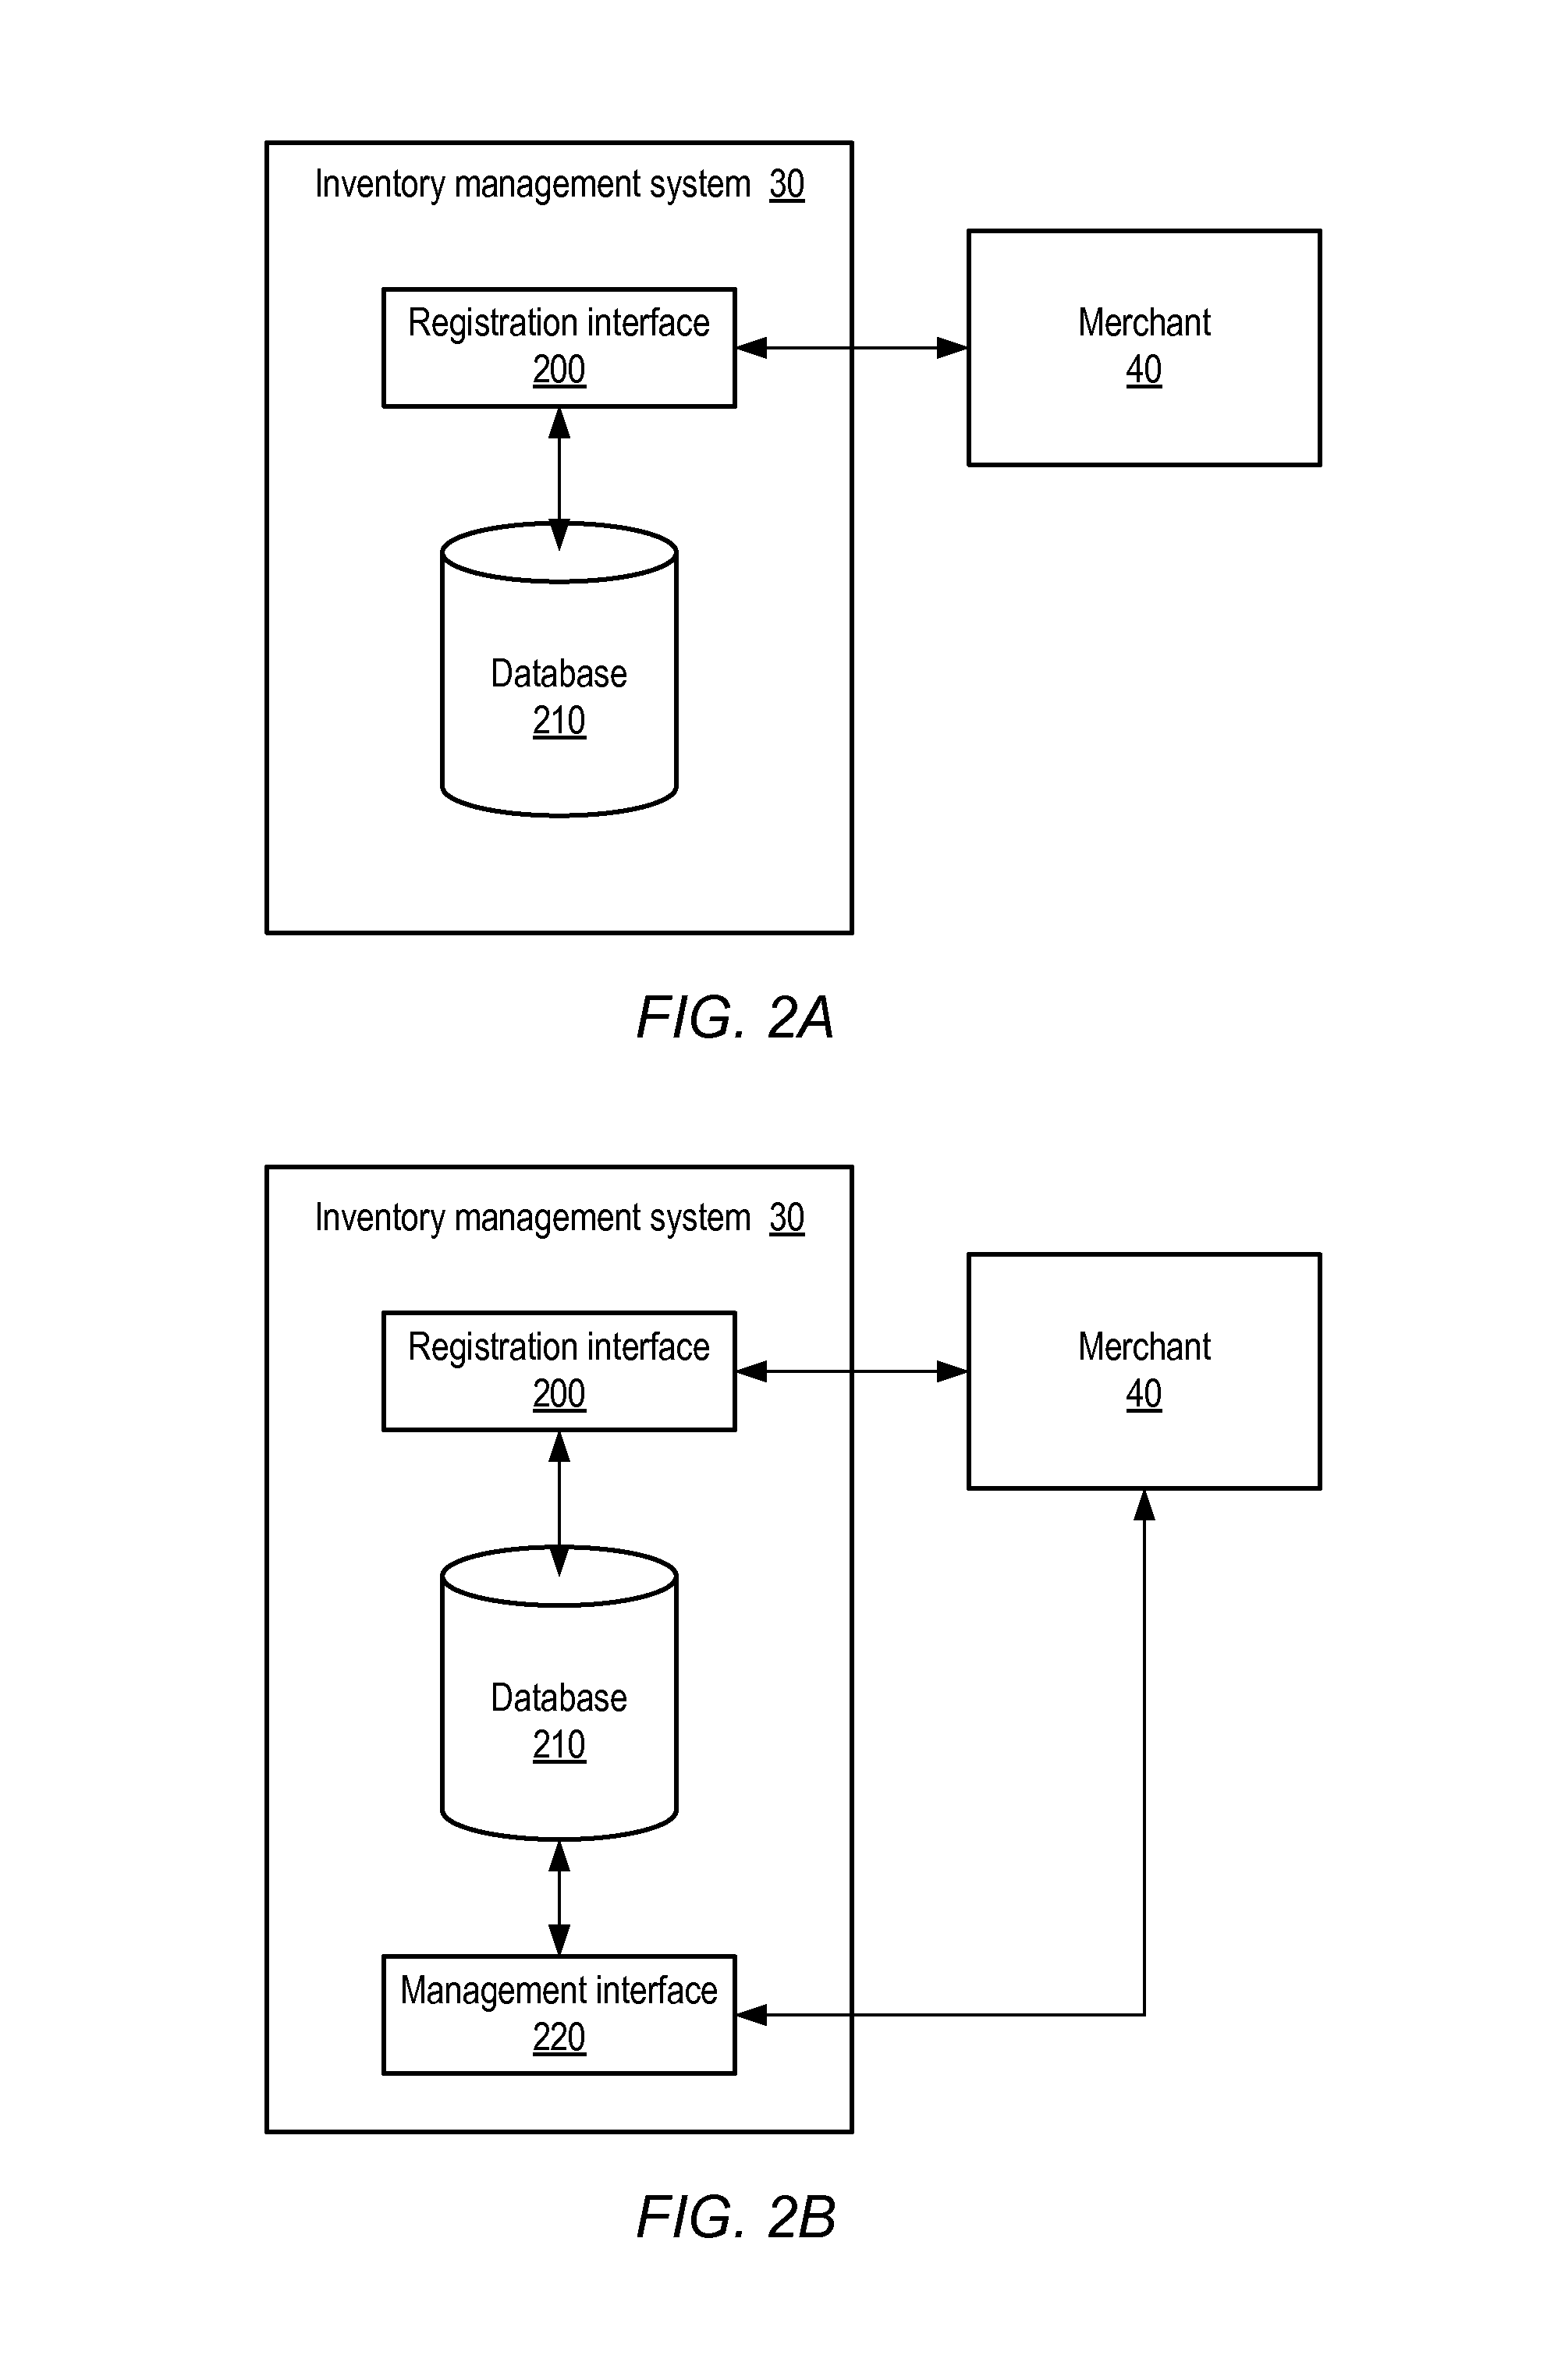 System and method for combining fulfillment of customer orders from merchants in computer-facilitated marketplaces